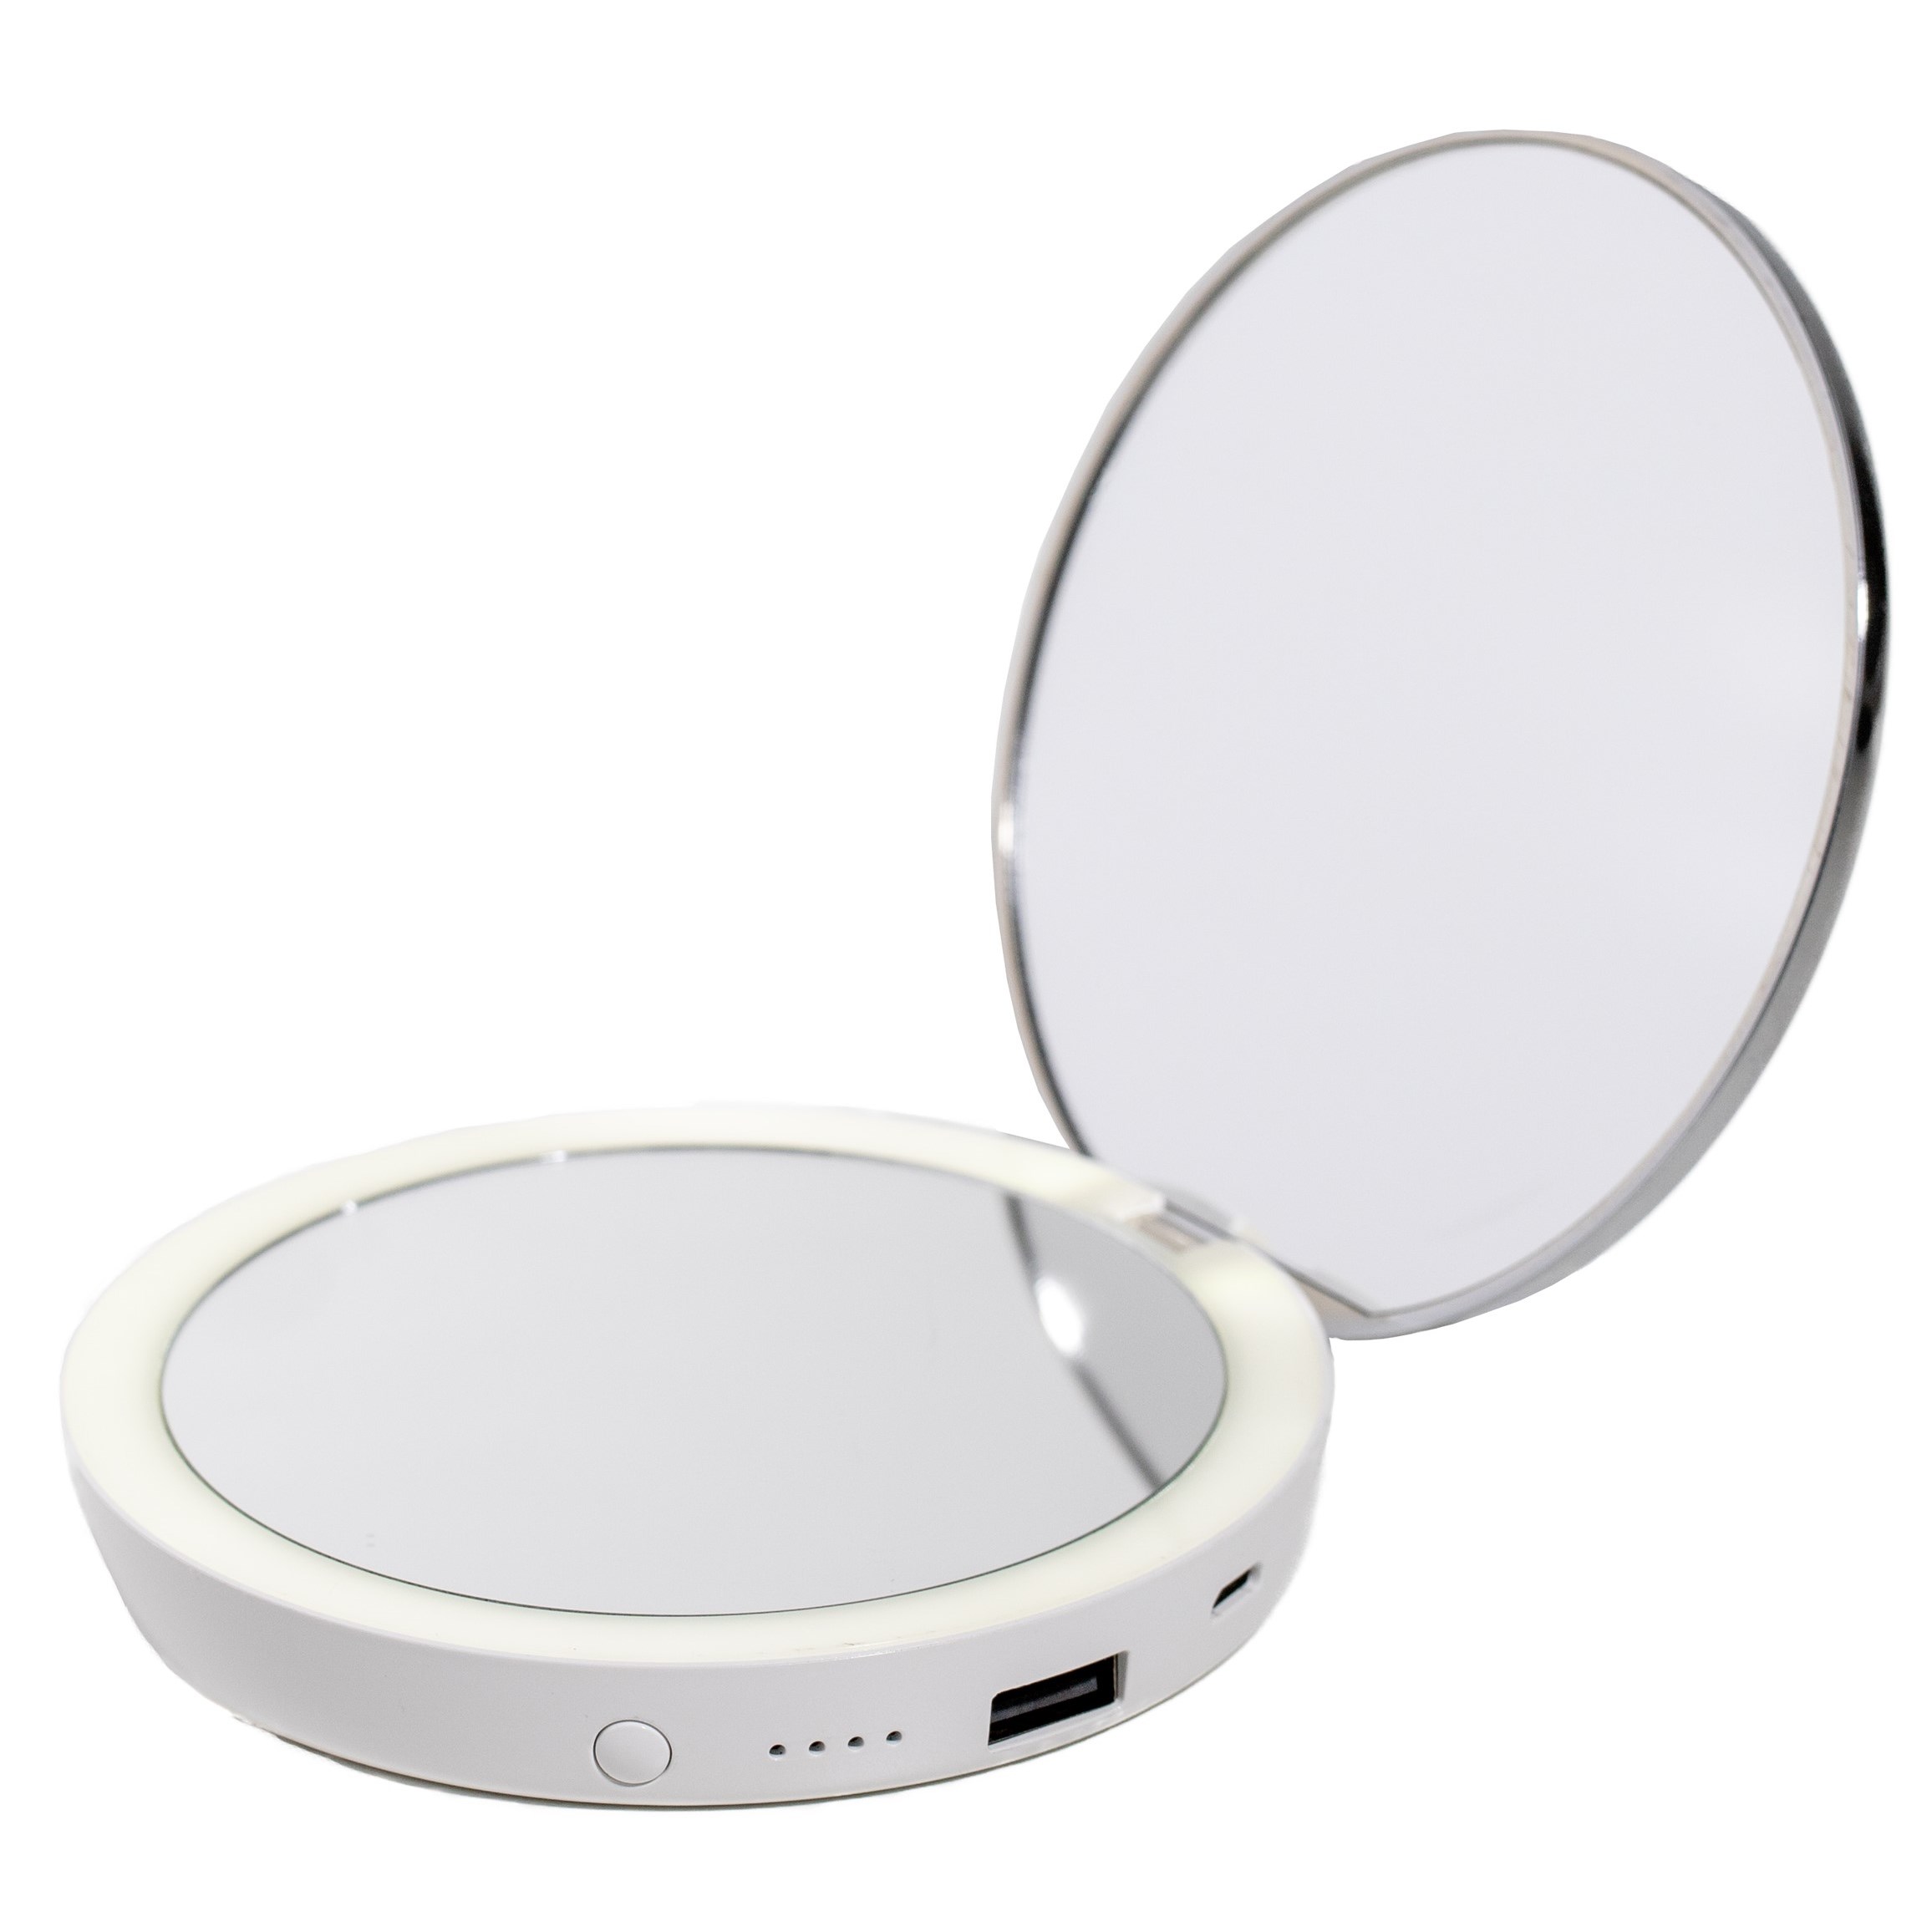 STYLPRO FlipNCharge Mirror